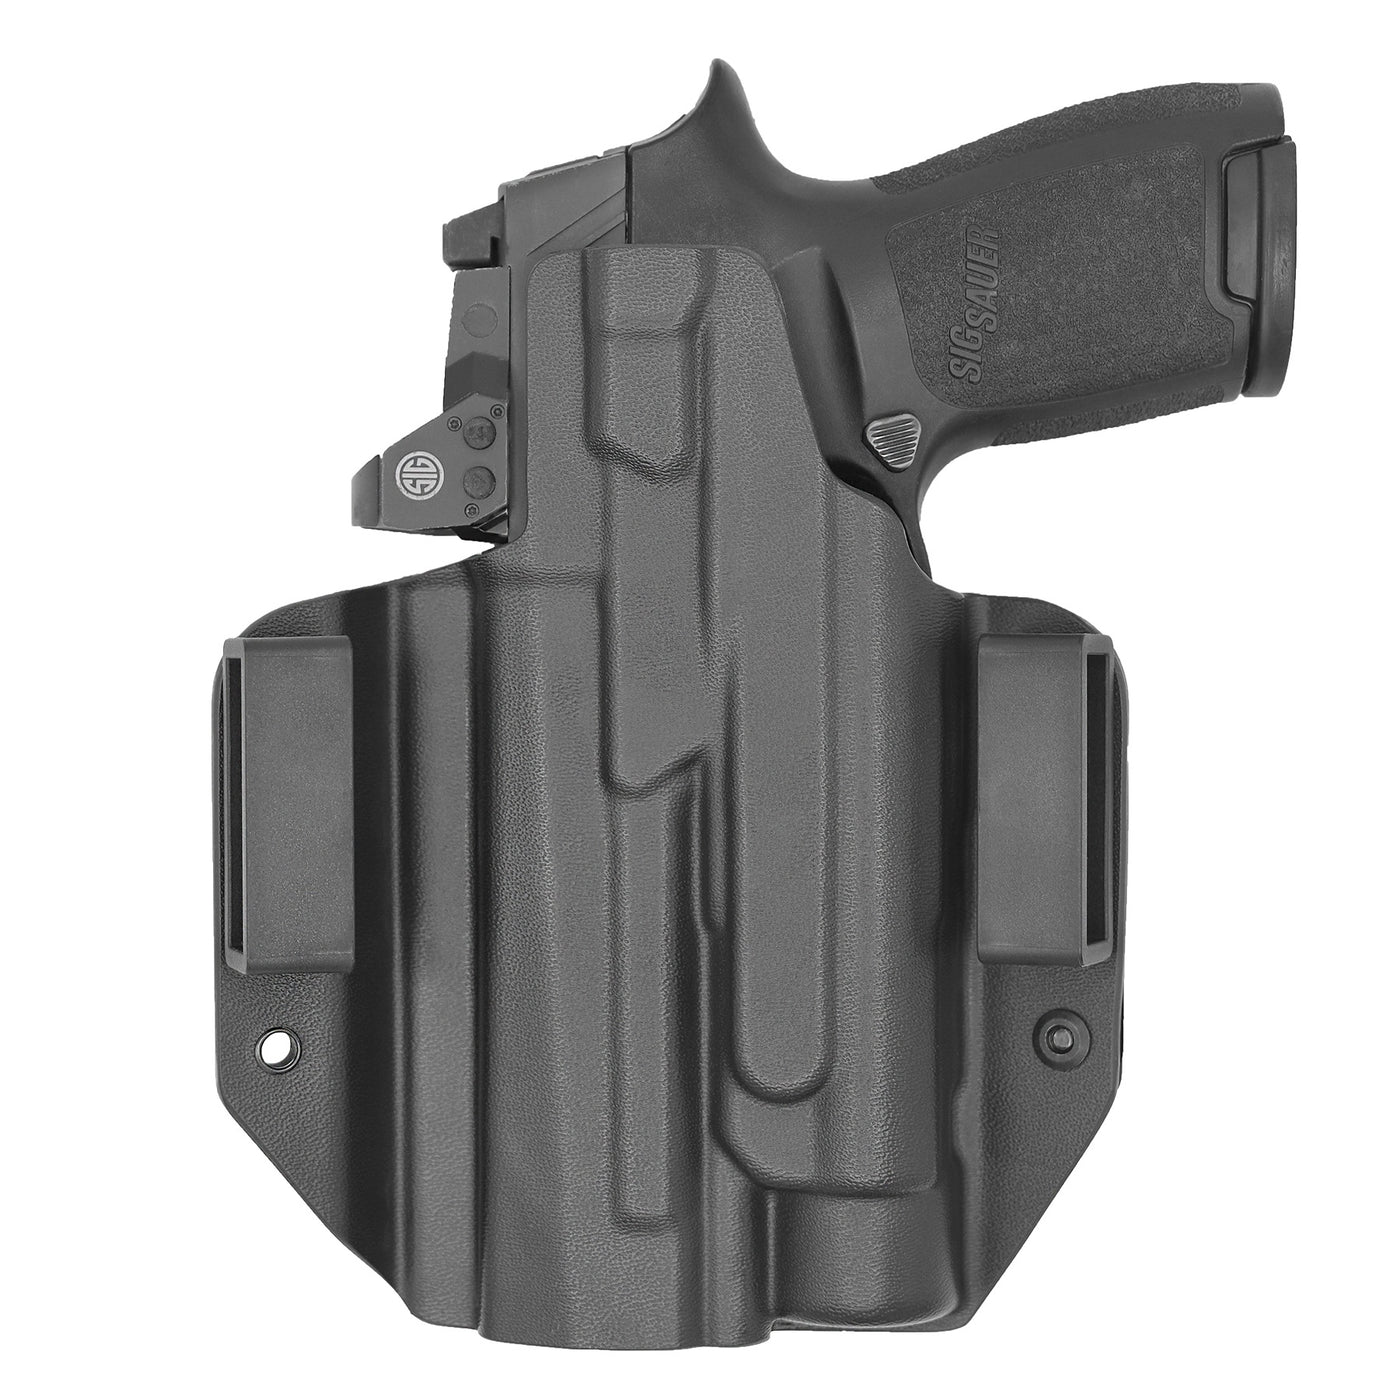 C&G Holsters quickship OWB Tactical FNX45T Streamlight TLR-1 in holstered position back view